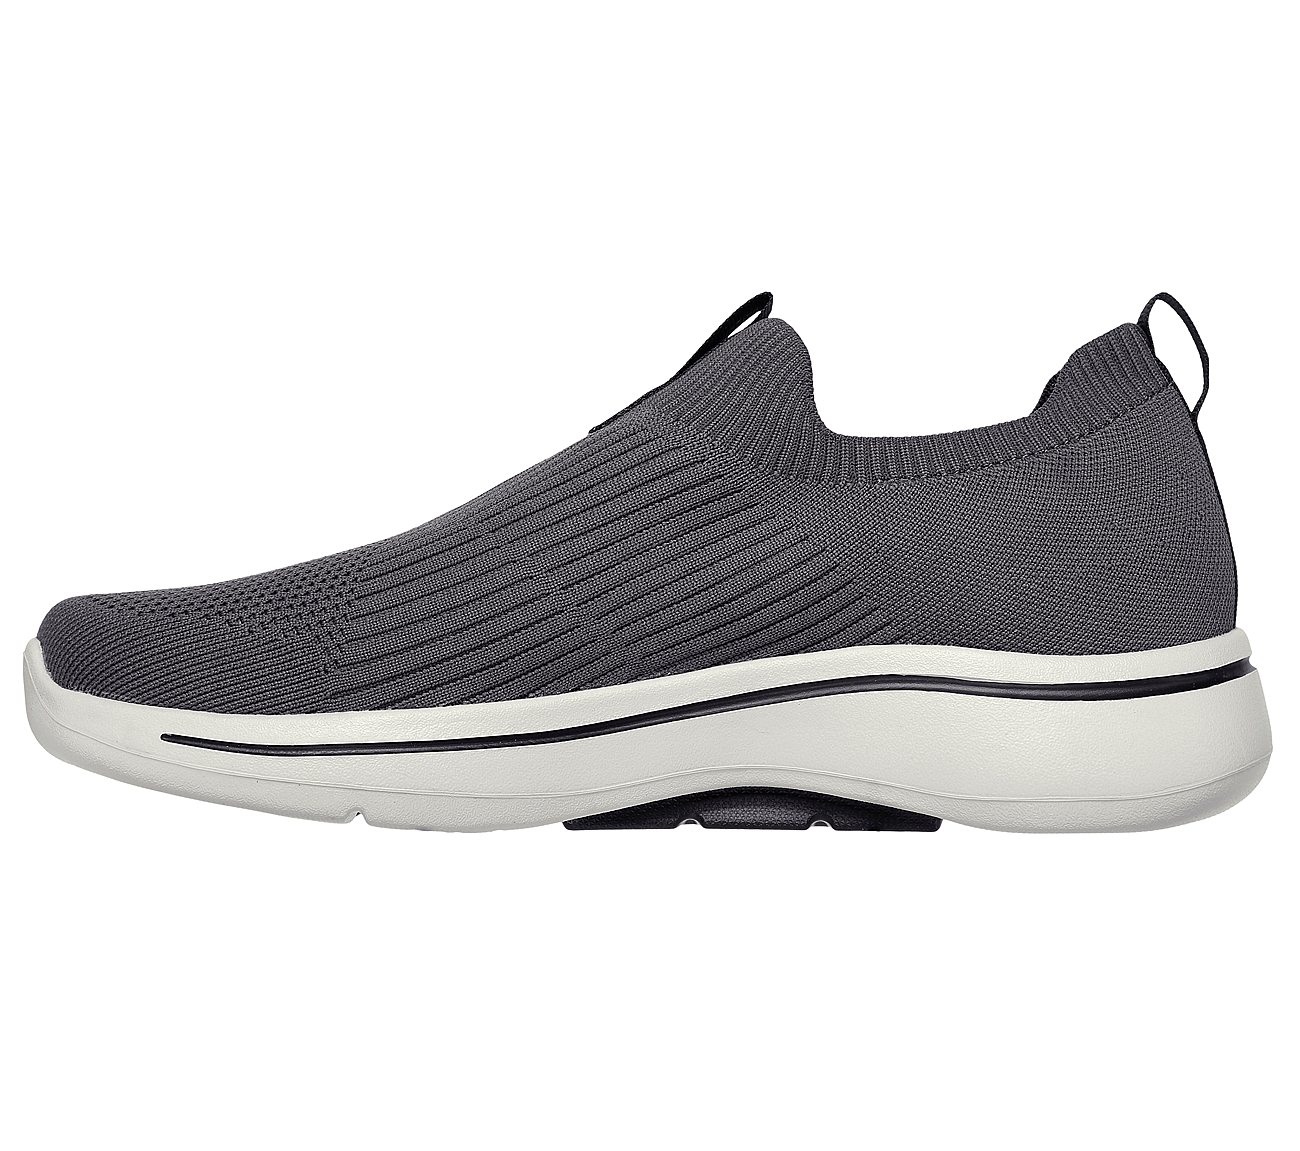 GO WALK ARCH FIT - ICONIC, CHARCOAL/BLACK Footwear Left View